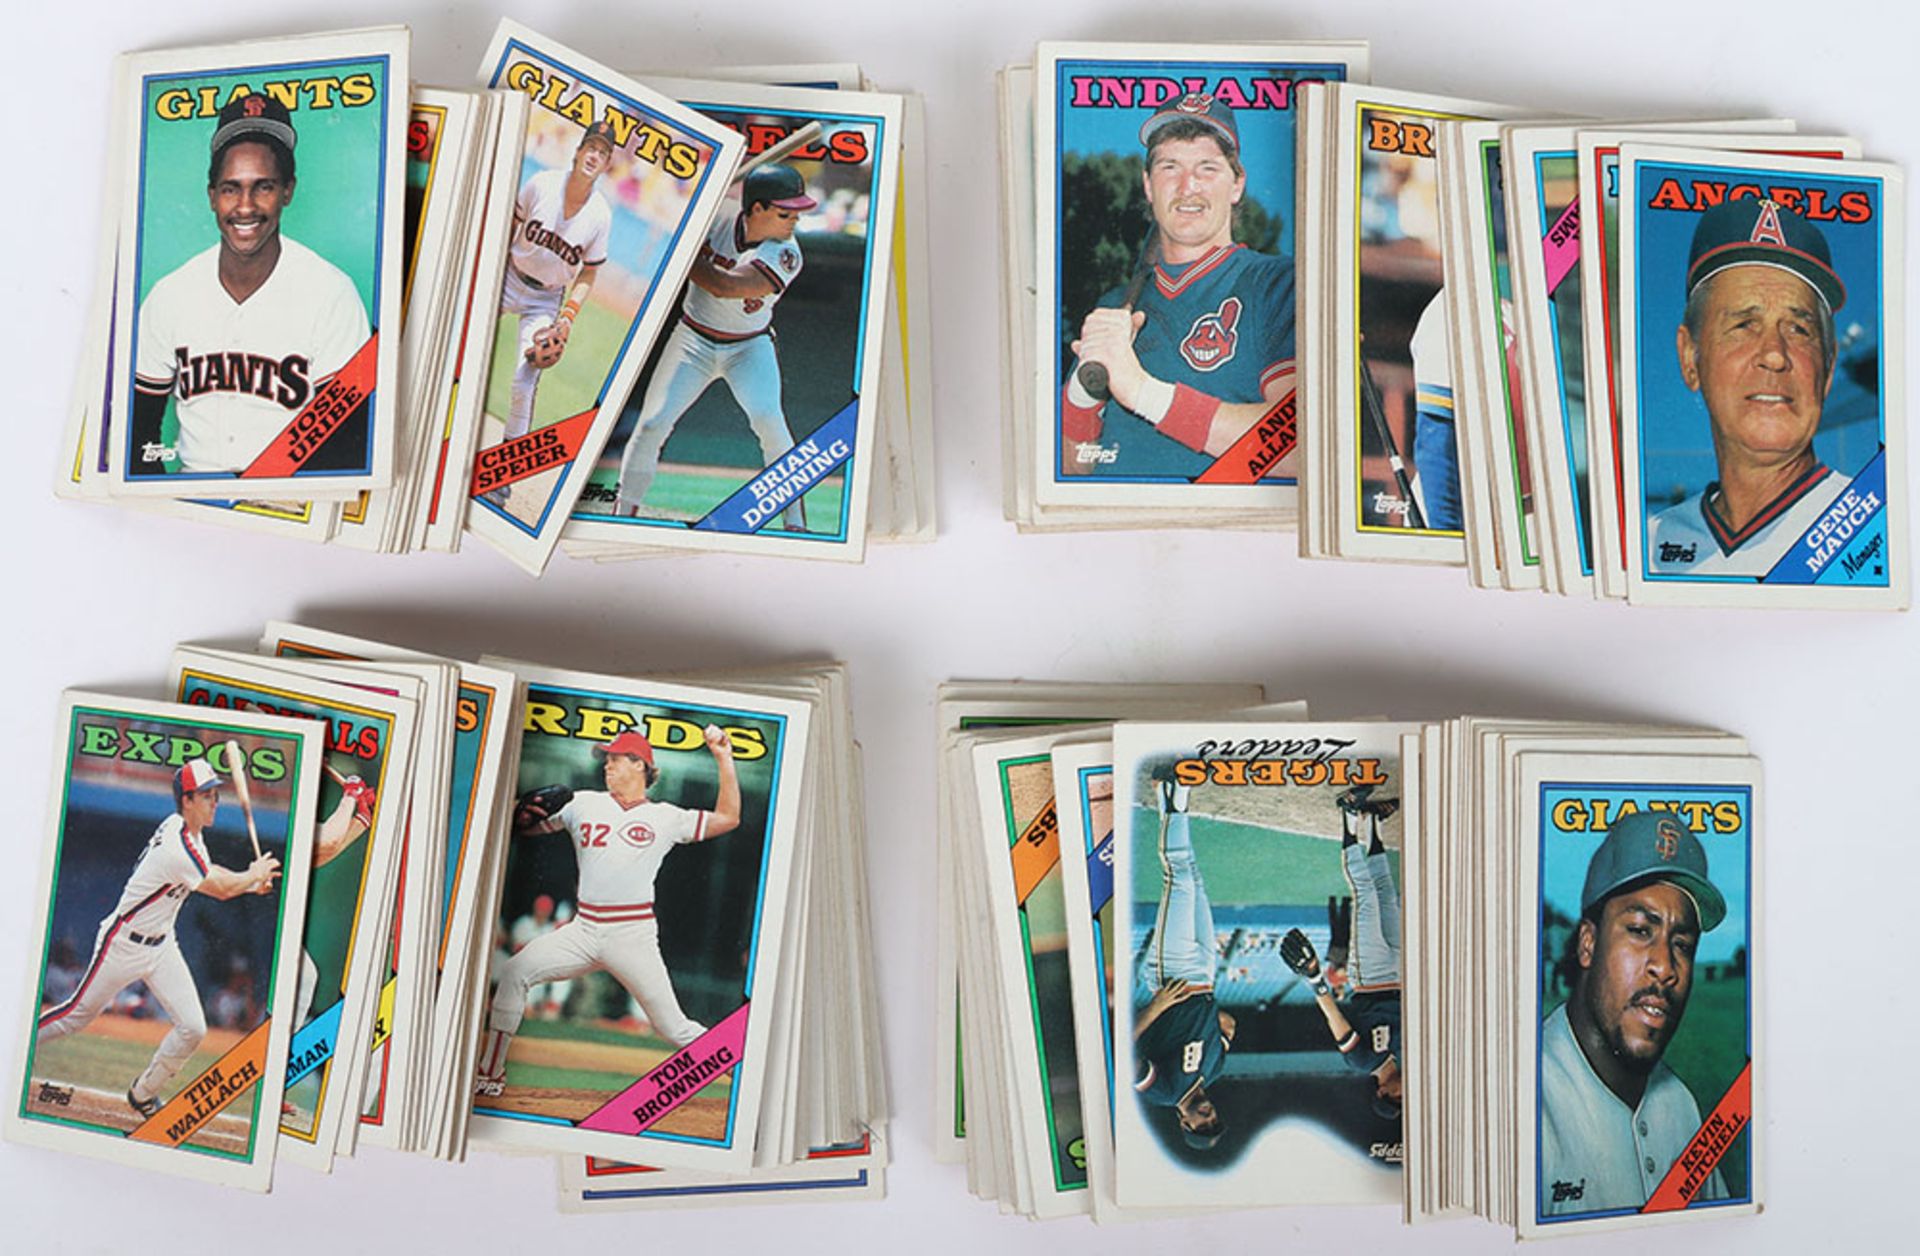 A Large Collection of 1988s Topps Chewing Gum Cards - Image 2 of 3